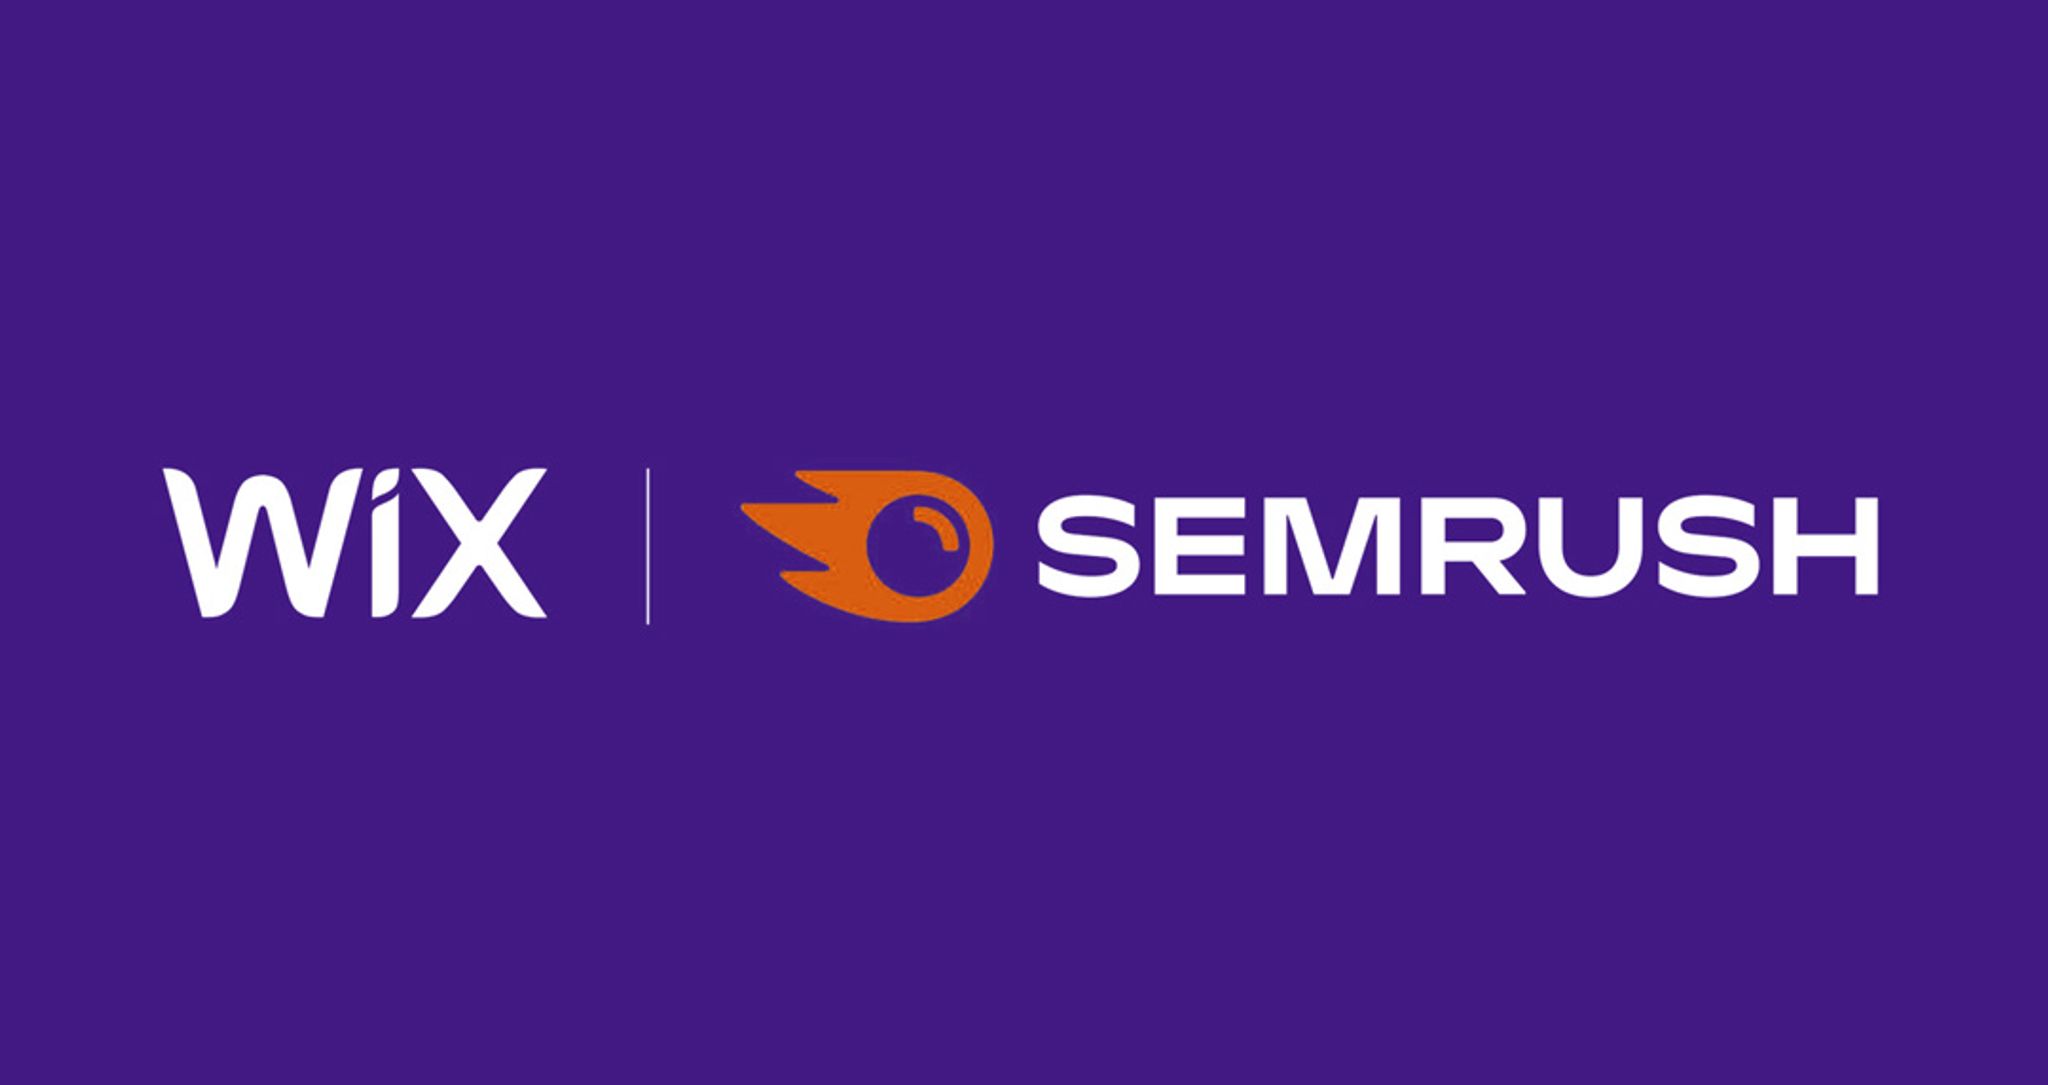 Image of Wix and Semrush logos against a purple background